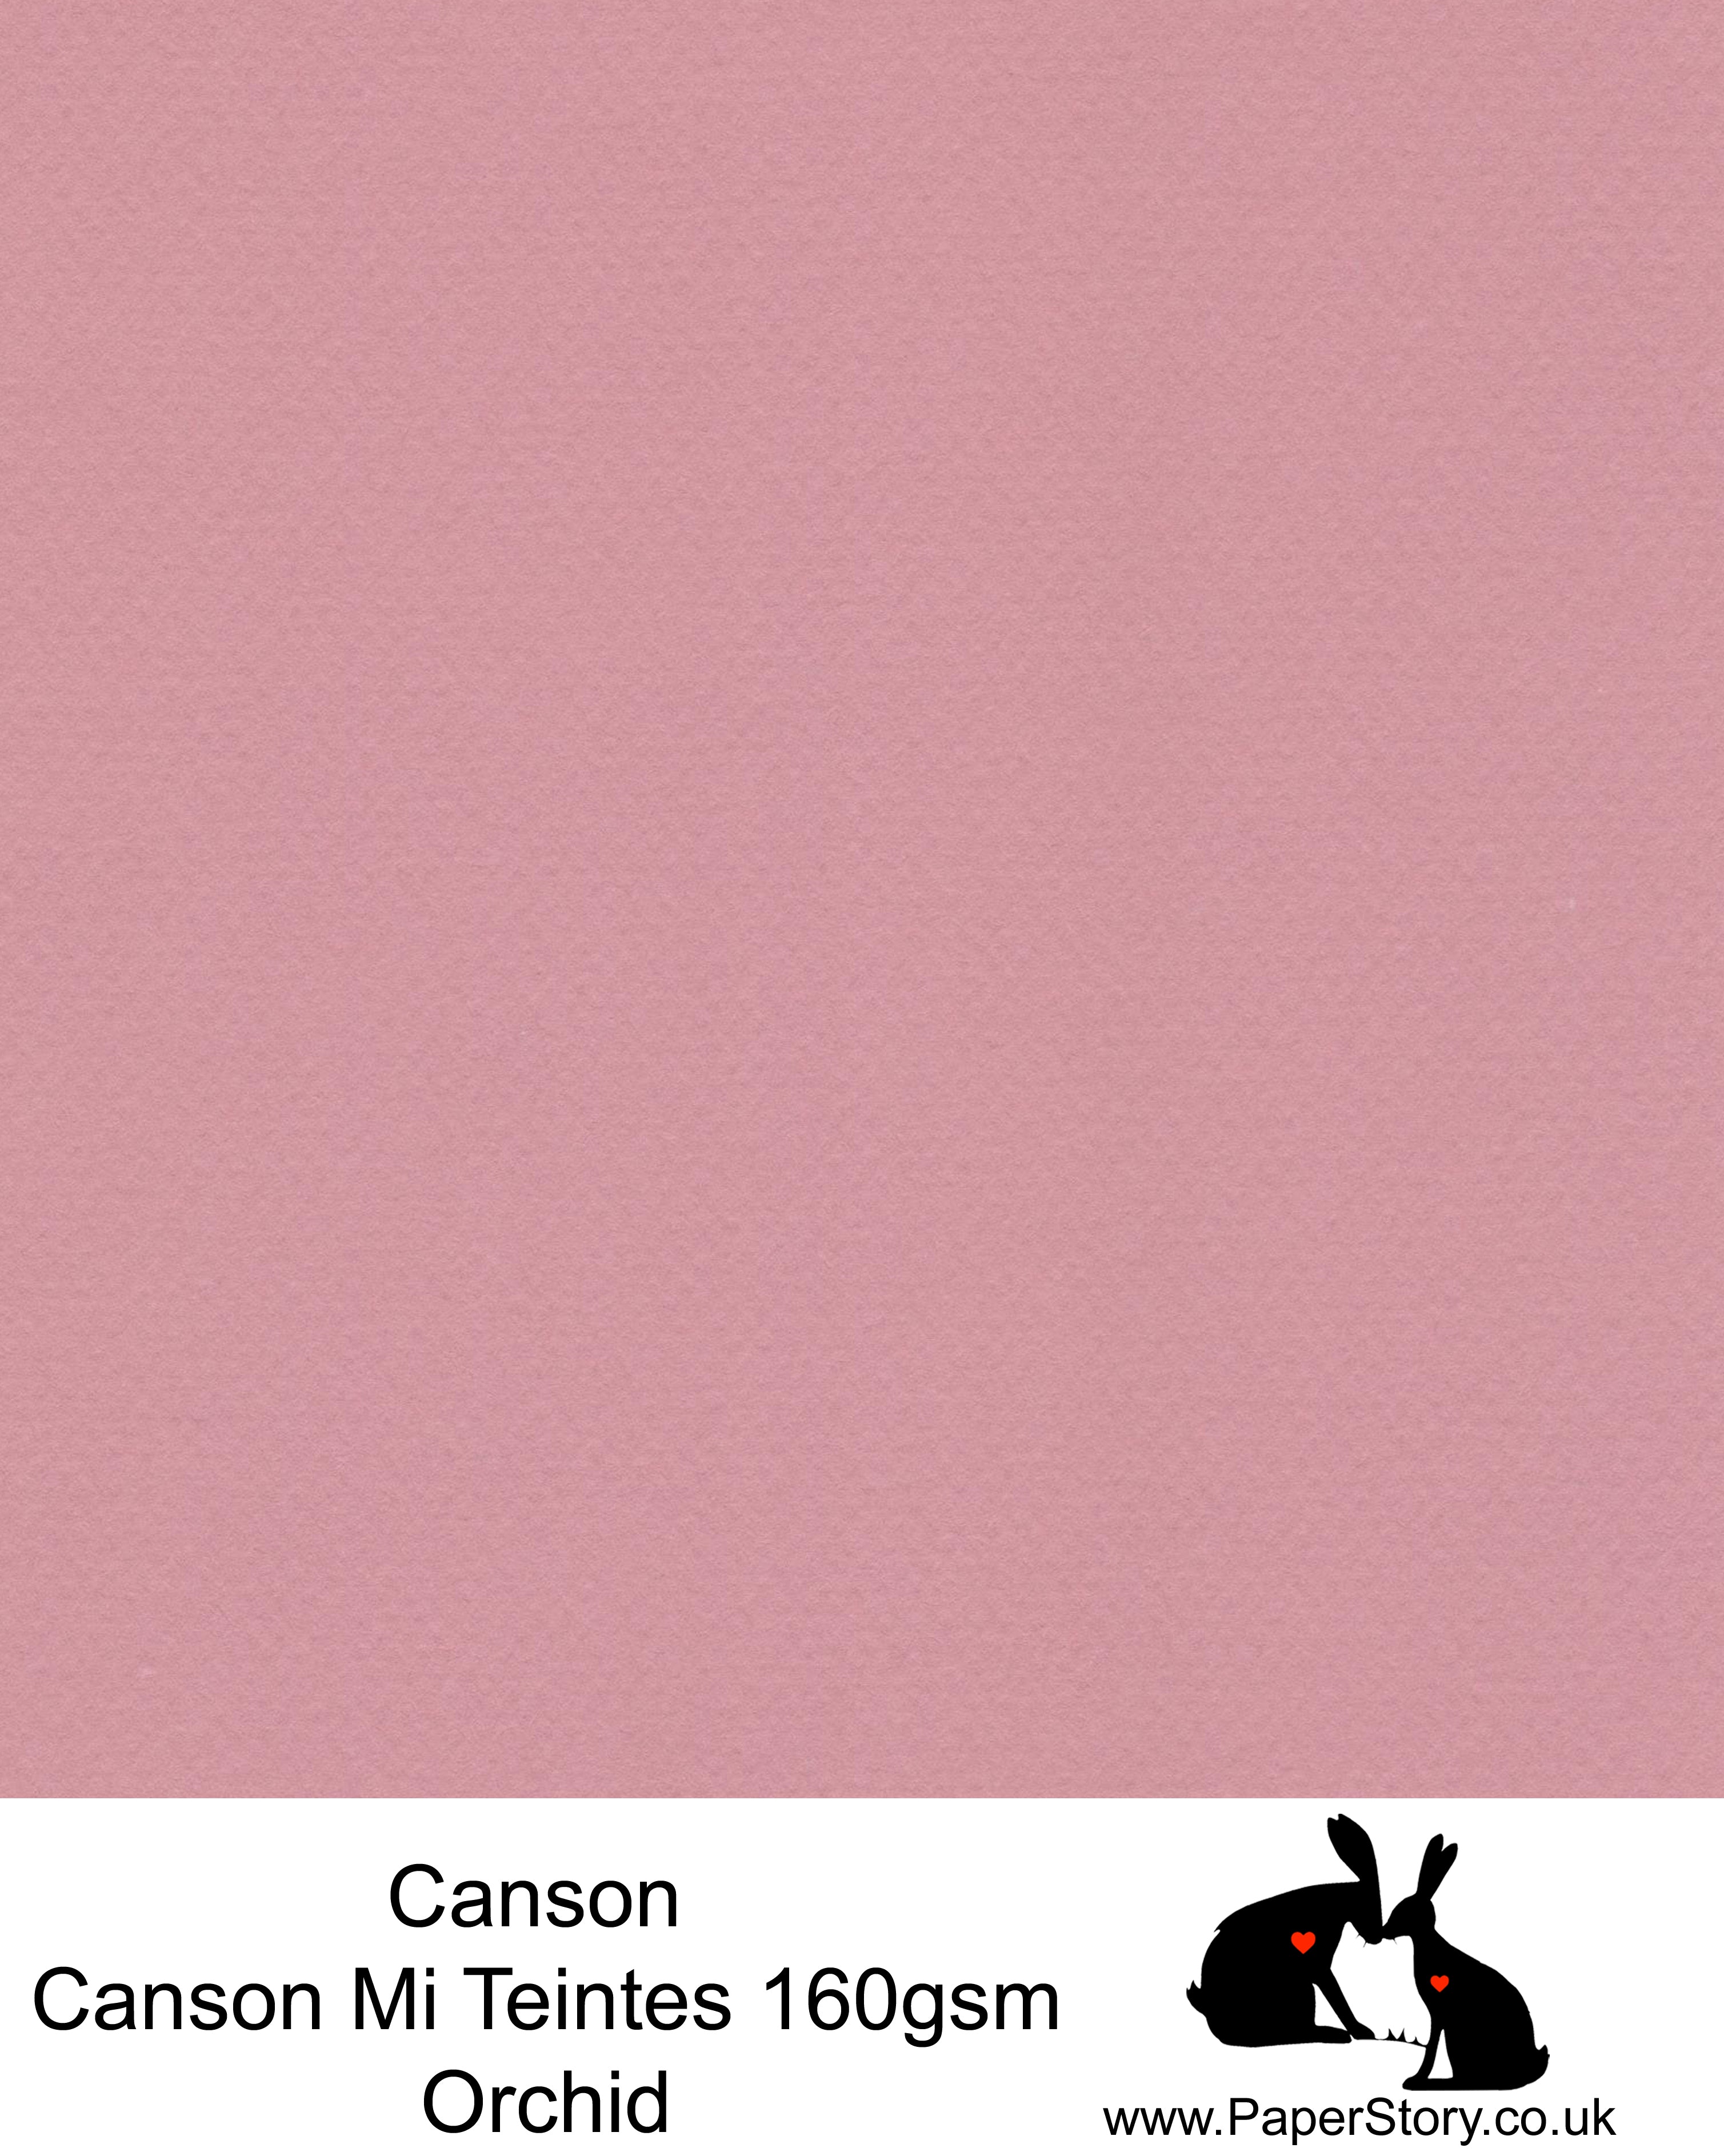 Canson Mi Teintes acid free, Orchid warm red pink, hammered texture honeycomb surface paper 160 gsm. This is a popular and classic paper for all artists especially well respected for Pastel  and Papercutting made famous by Paper Panda. This paper has a honeycombed finish one side and fine grain the other. An authentic art paper, acid free with a  very high 50% cotton content. Canson Mi-Teintes complies with the ISO 9706 standard on permanence, a guarantee of excellent conservation  